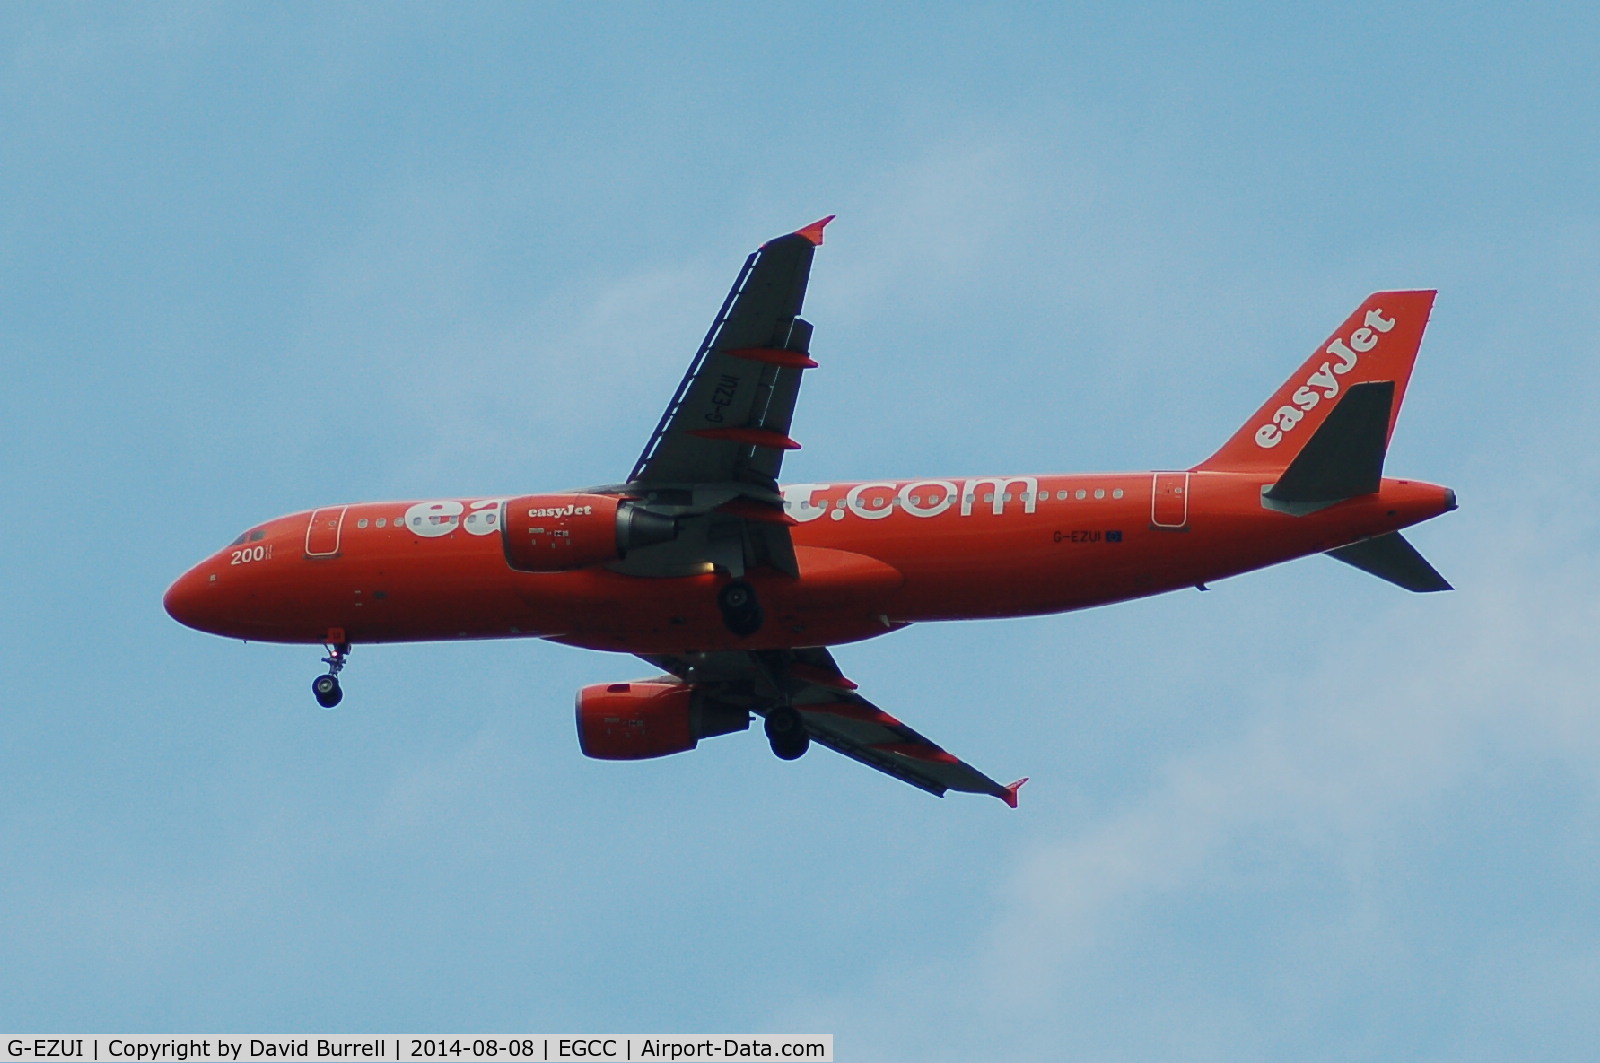 G-EZUI, 2011 Airbus A320-214 C/N 4721, Easyjet Airbus A320-214 G-EZUI on approach to Manchester Airport.